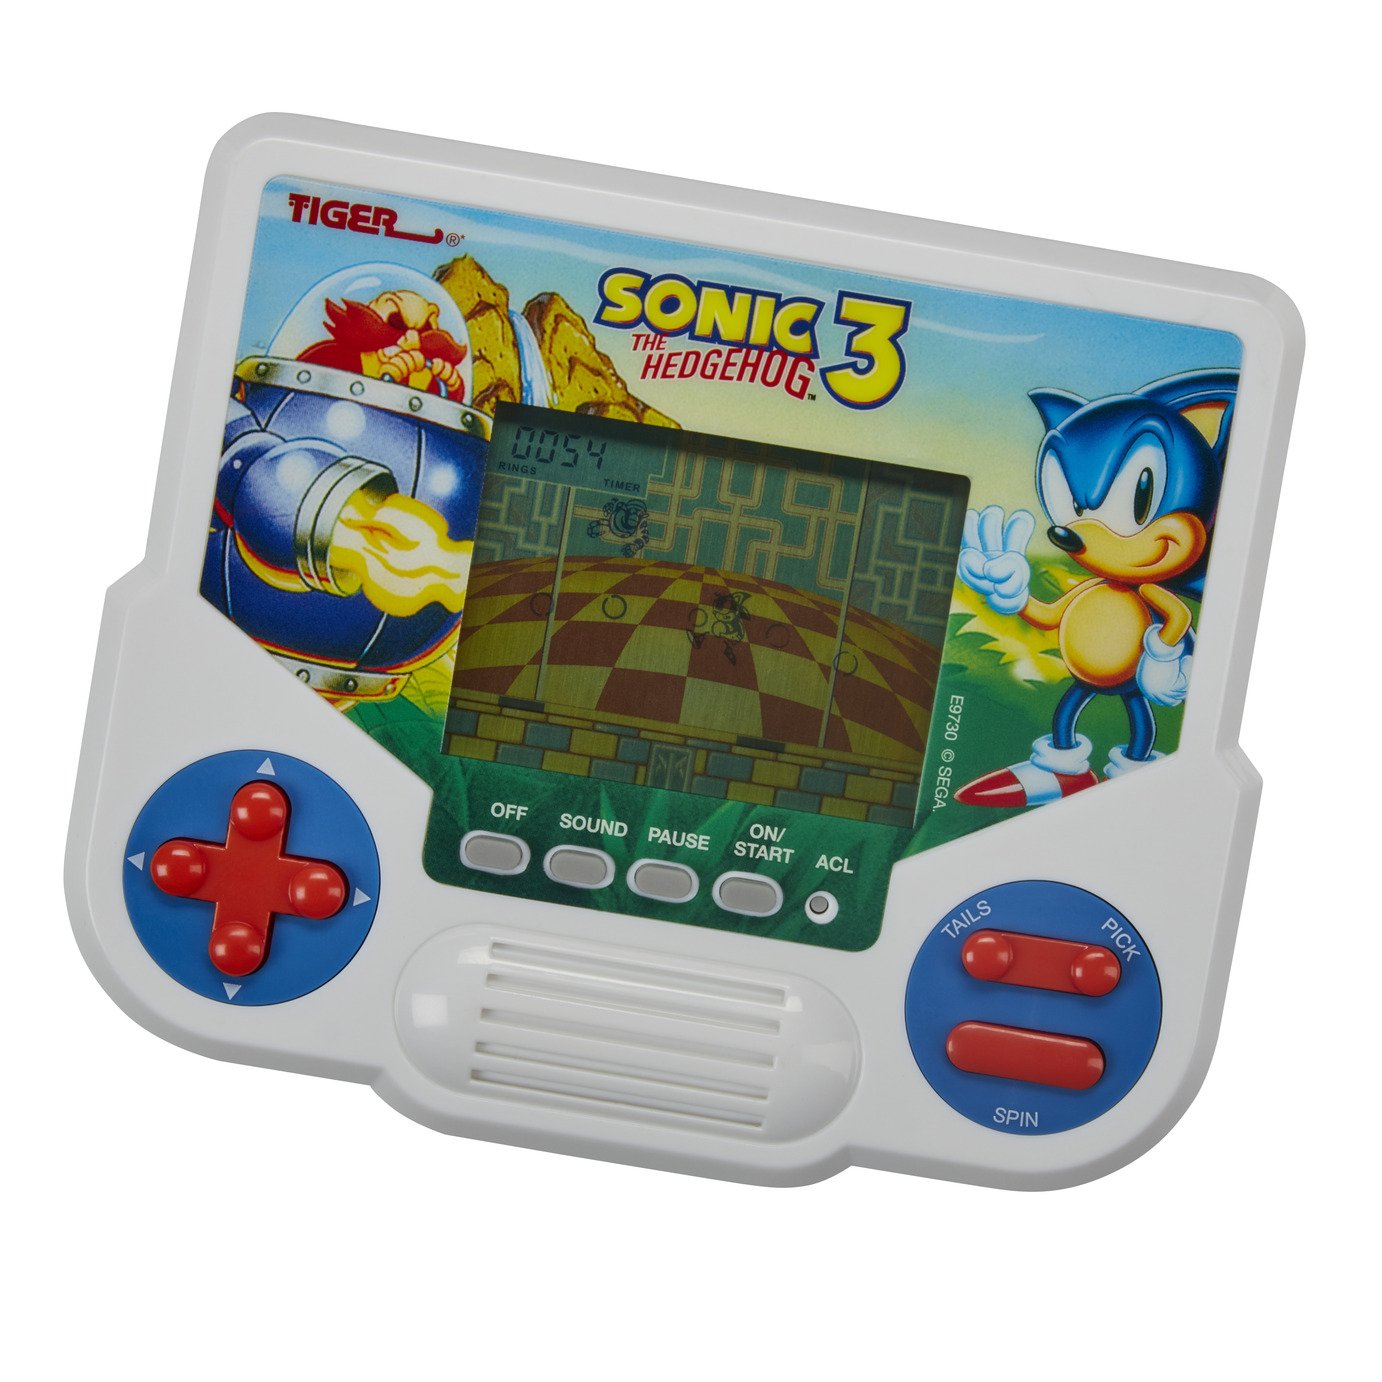 Sonic the Hedgehog 3 LCD Video Game Review